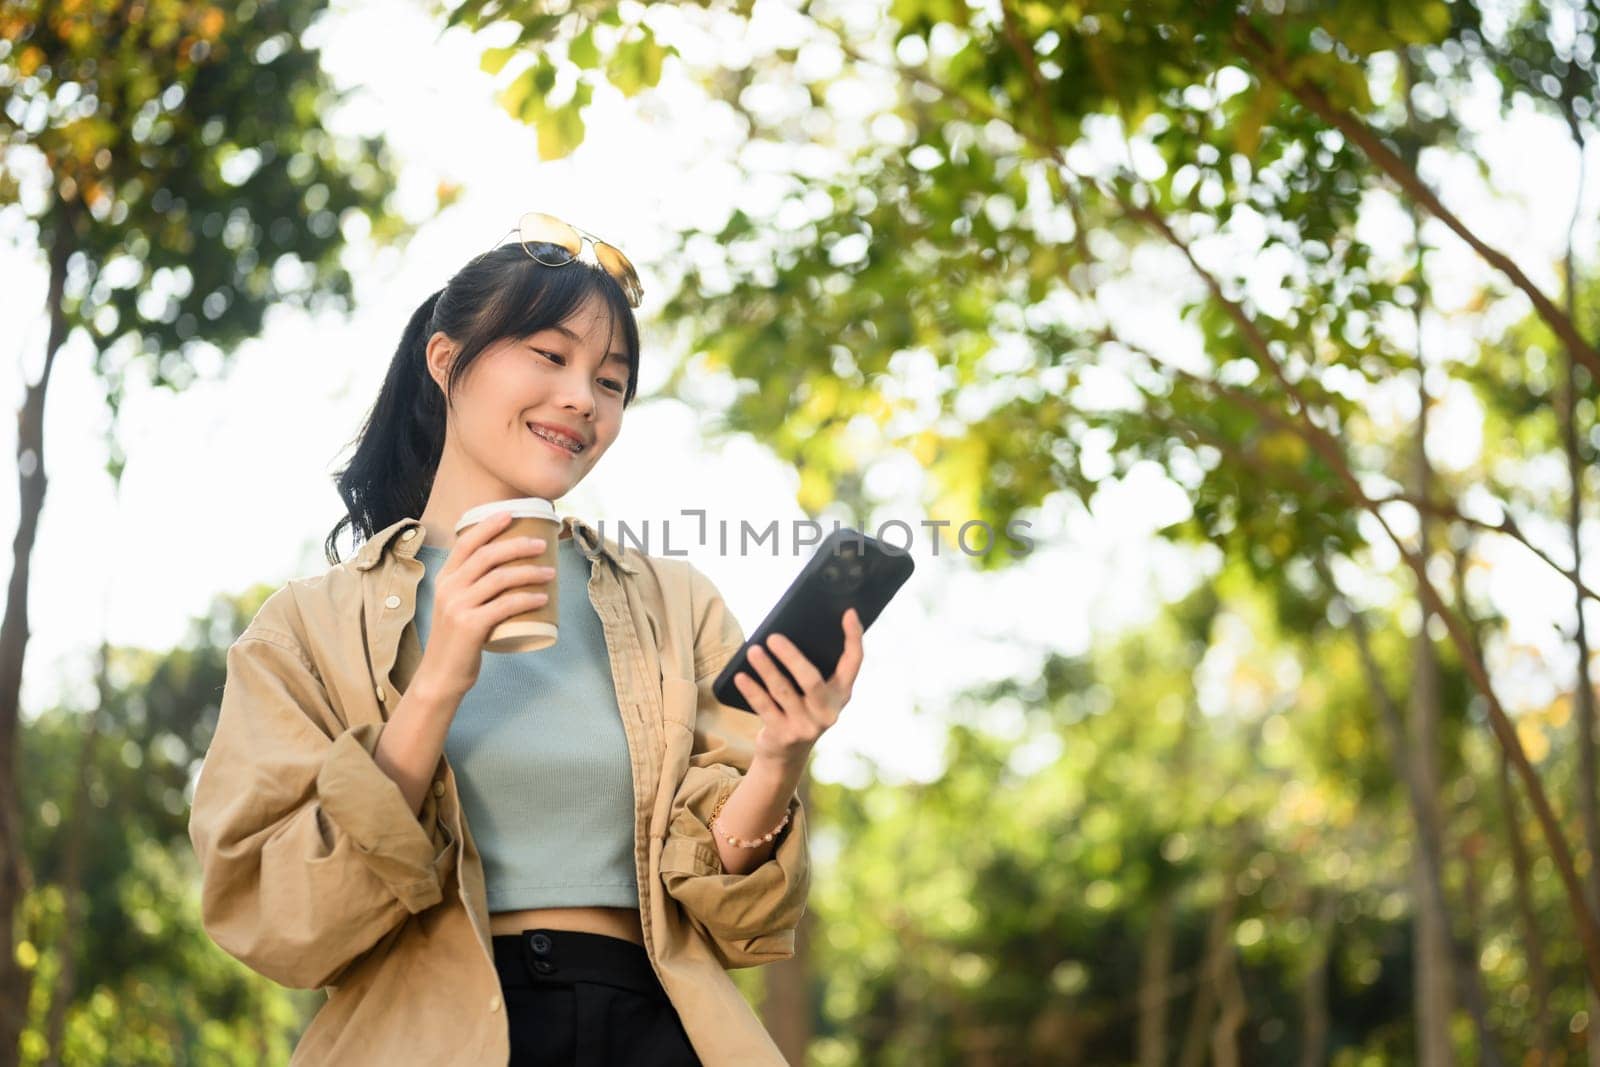 Smiling young lady sitting in the park drinking coffee and checking her mobile phone.